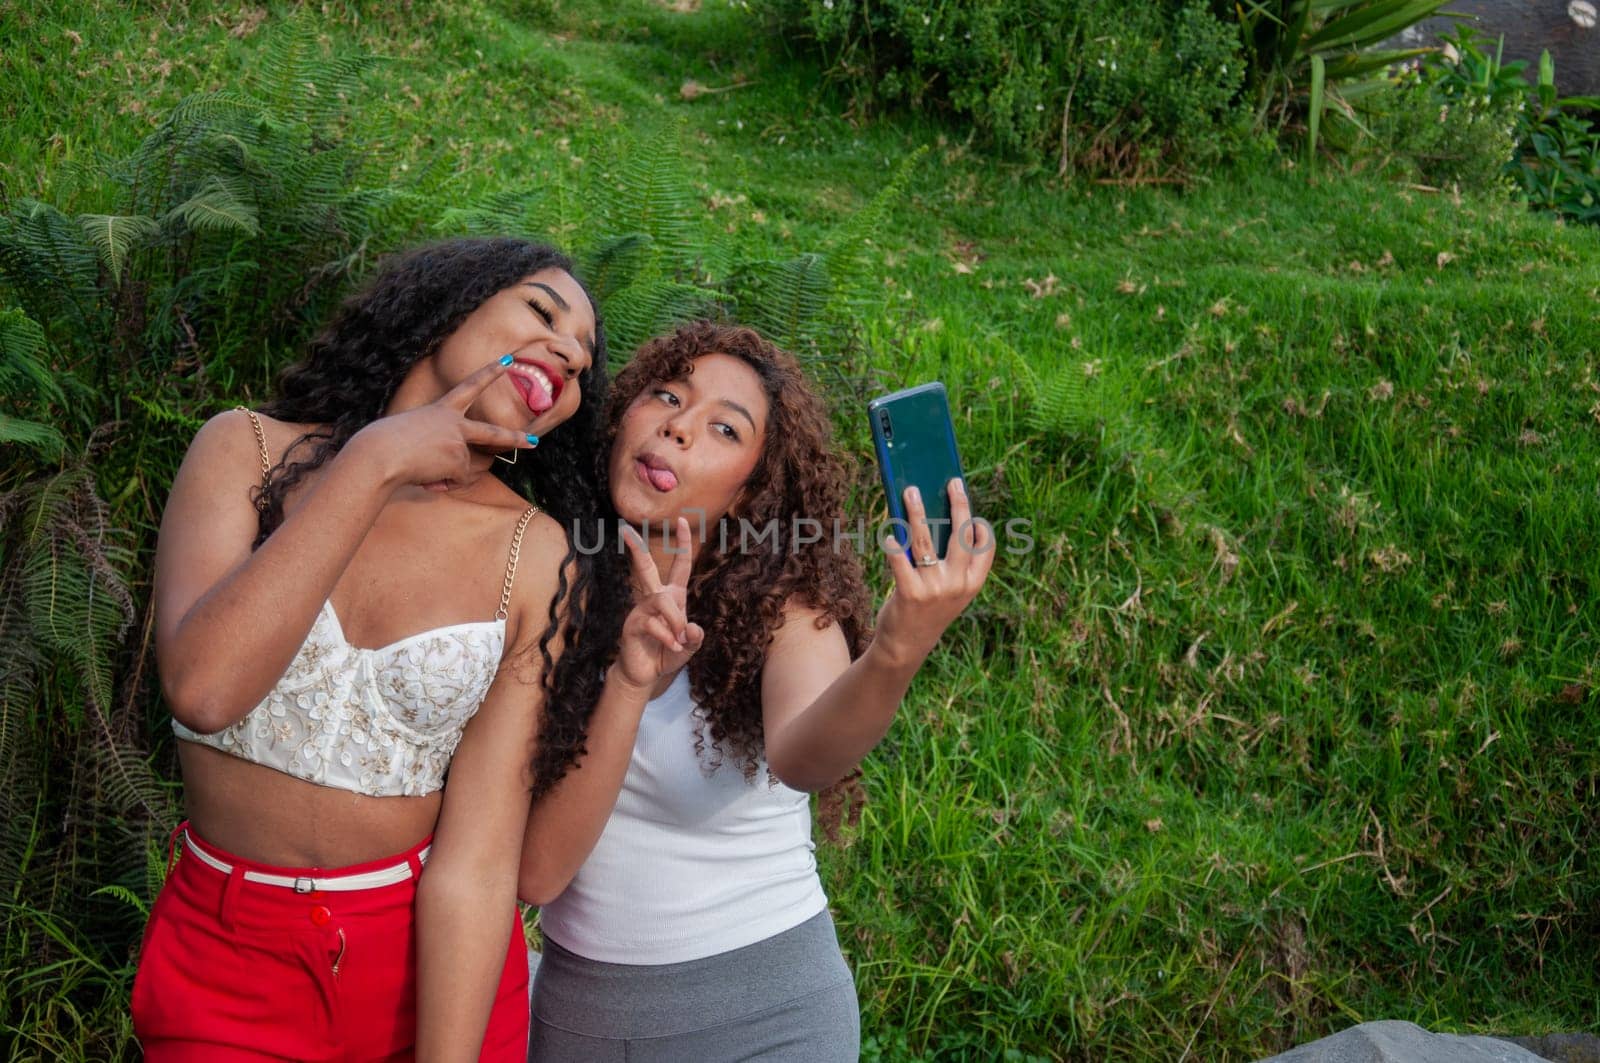 copy space of two teenagers taking a selfie with a funny expression with their tongues out and victory gestures with their fingers by Raulmartin